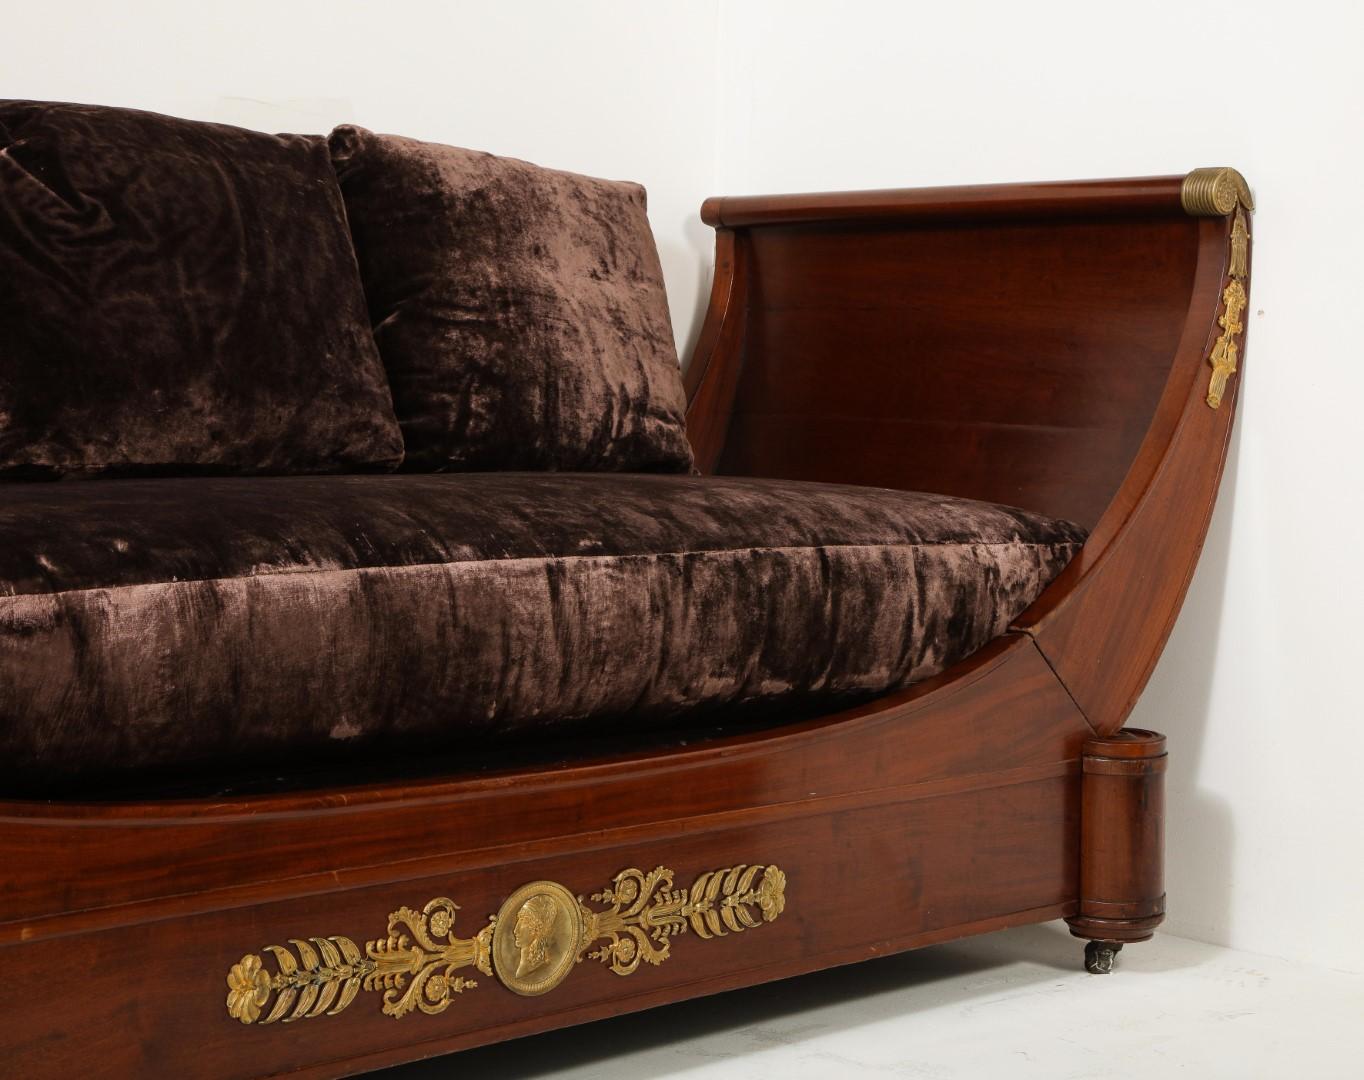 20th Century French Empire Style Mahogany Daybed with Ormolu Mounts and Velvet Upholstery For Sale